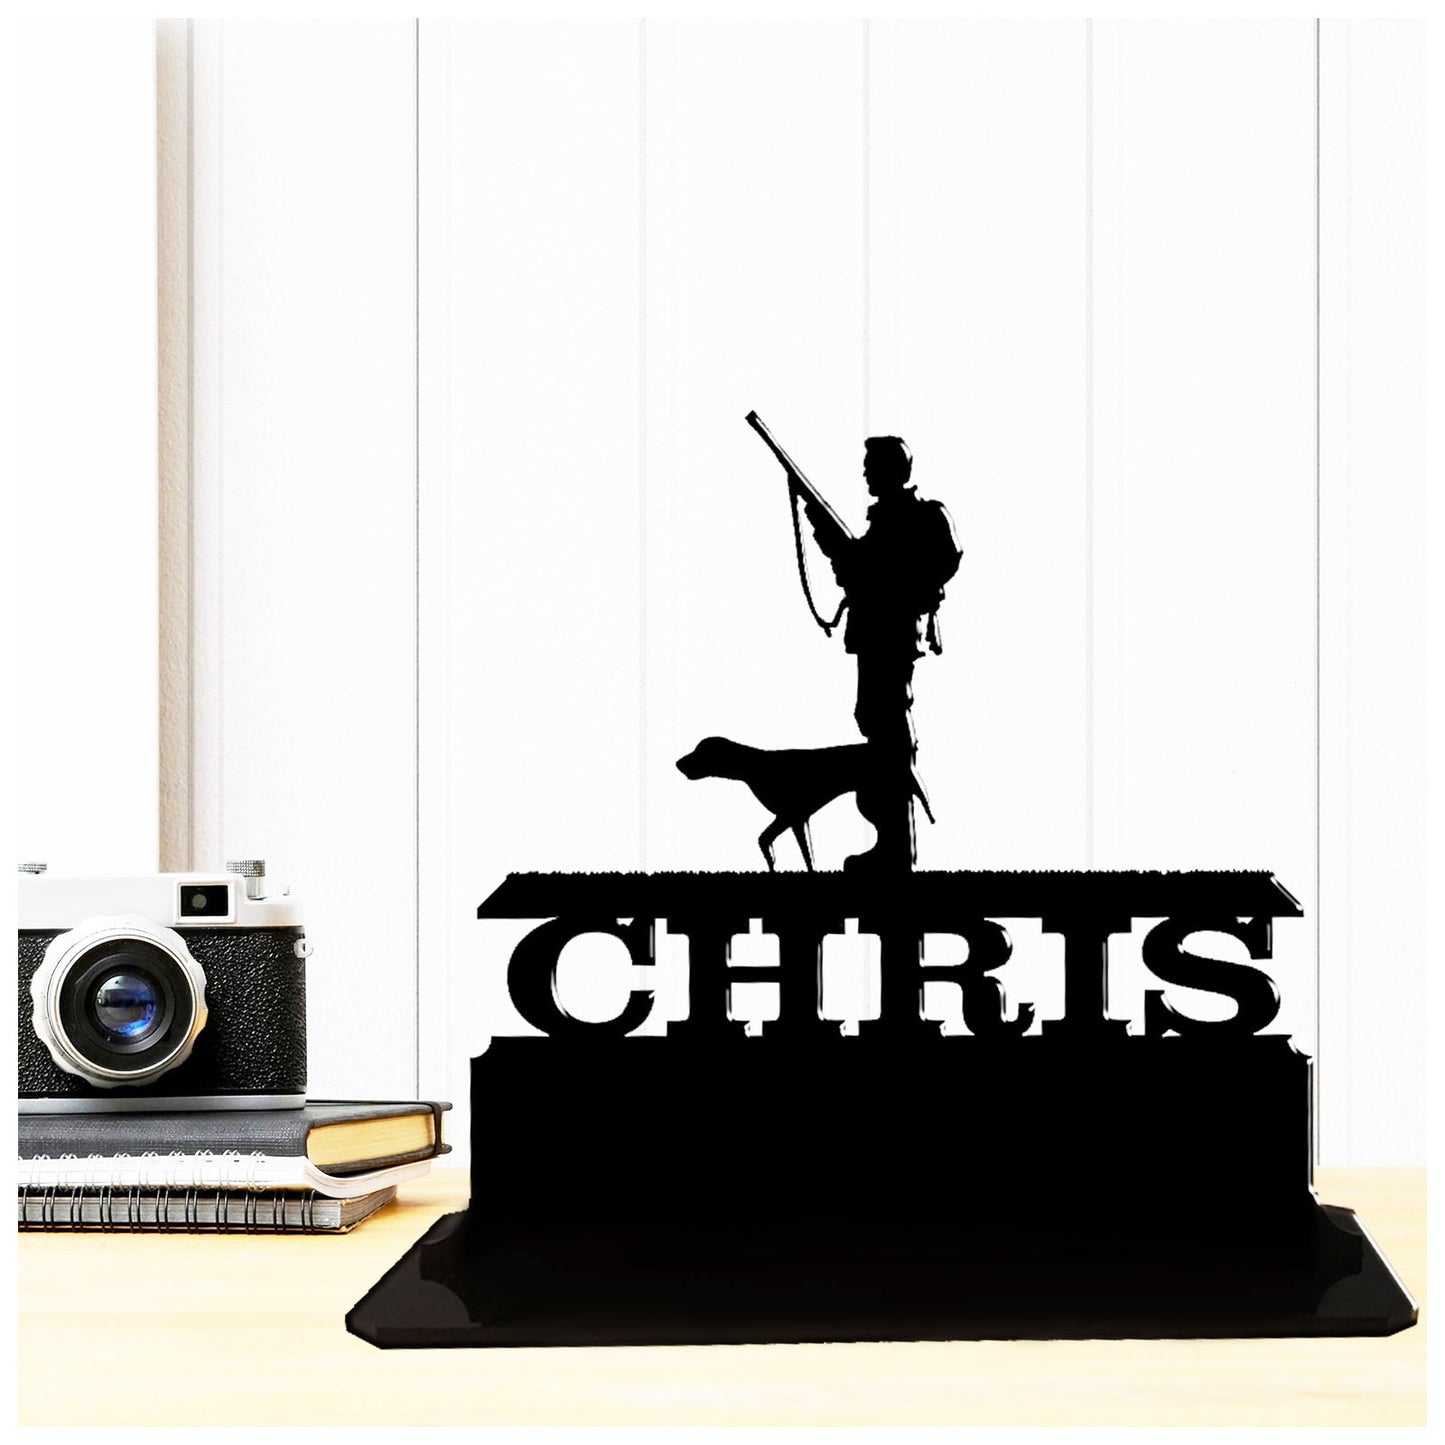 Personalised unique acrylic man and dog hunting gift. This standalone present is a keepsake ornament plaque.